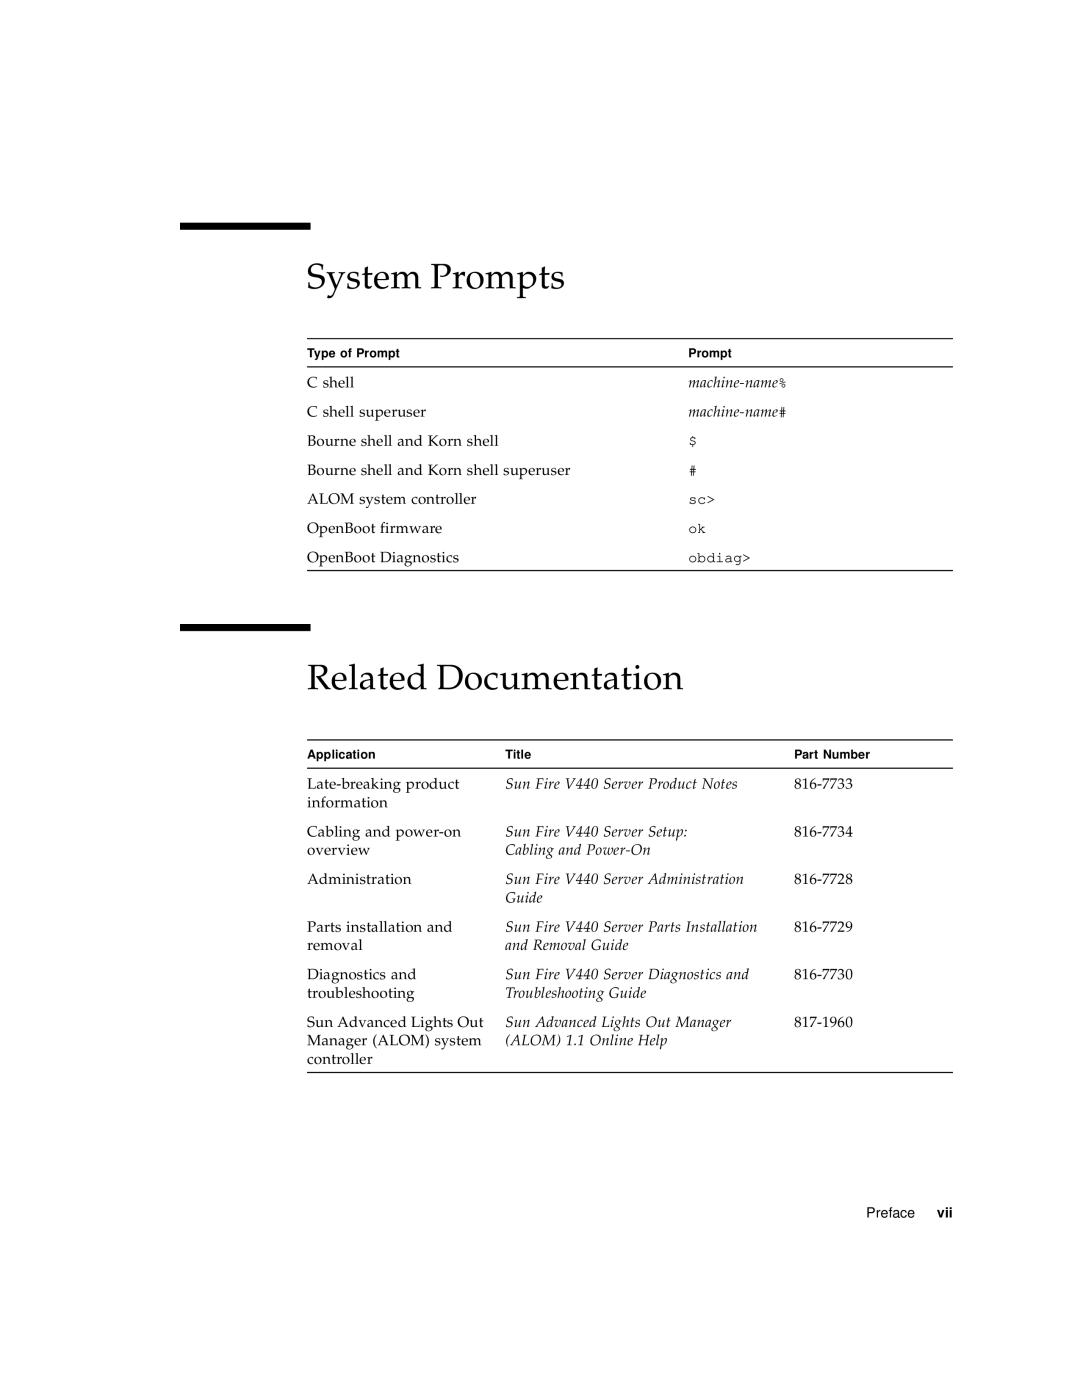 Sun Microsystems 816-7727-10 manual System Prompts, Related Documentation 